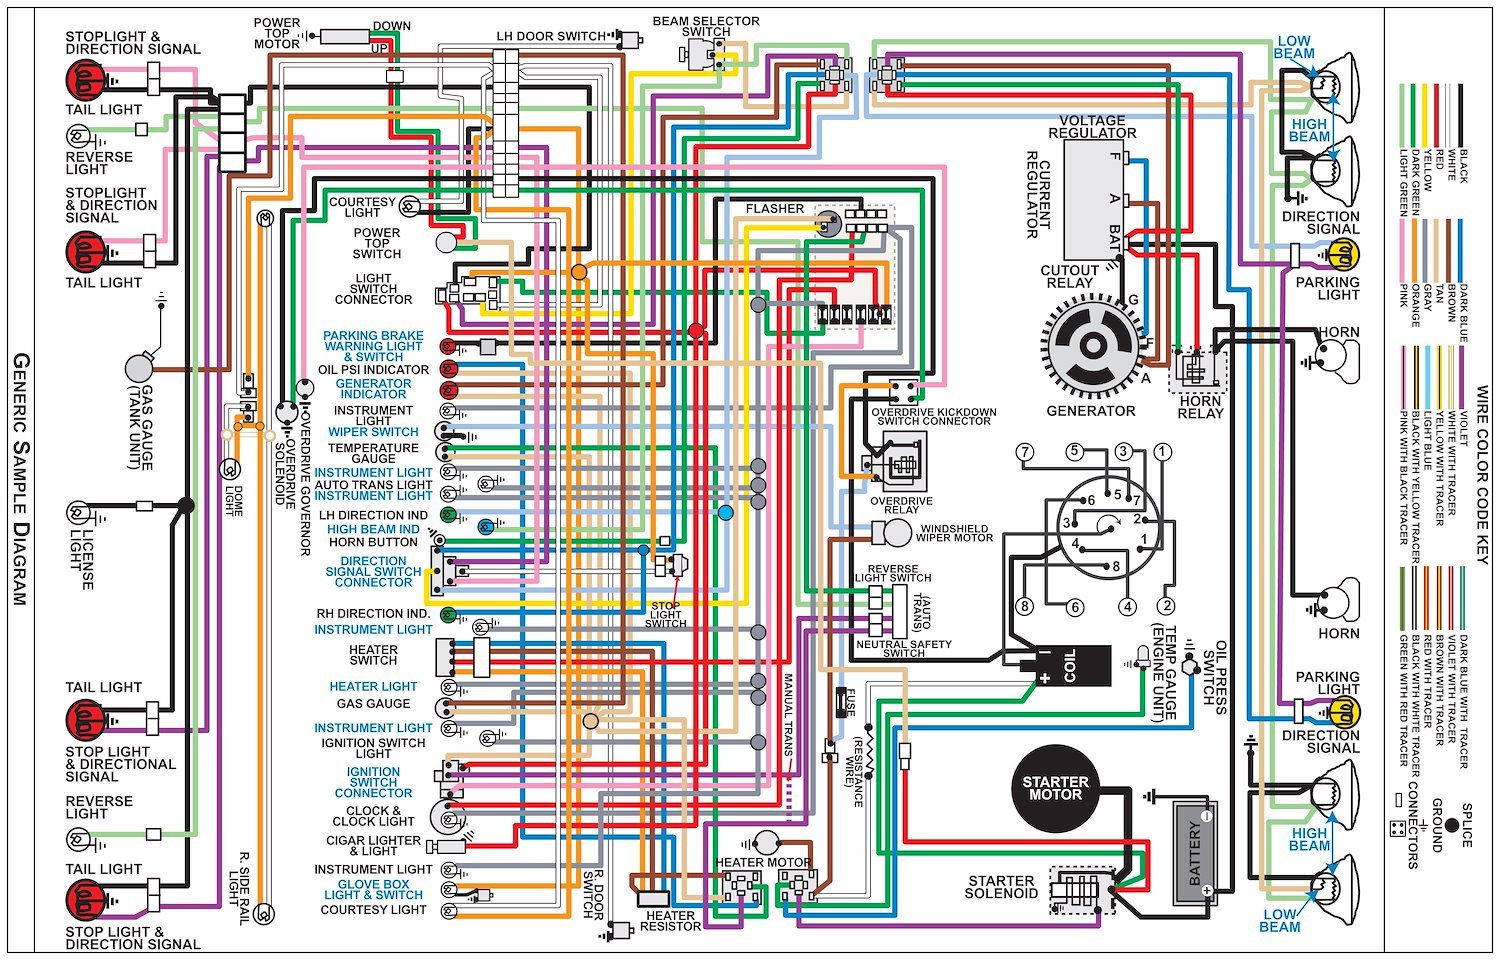 Wiring Diagram for 1978 Chevy Camaro (All Models), 11 in. x 17 in., Laminated